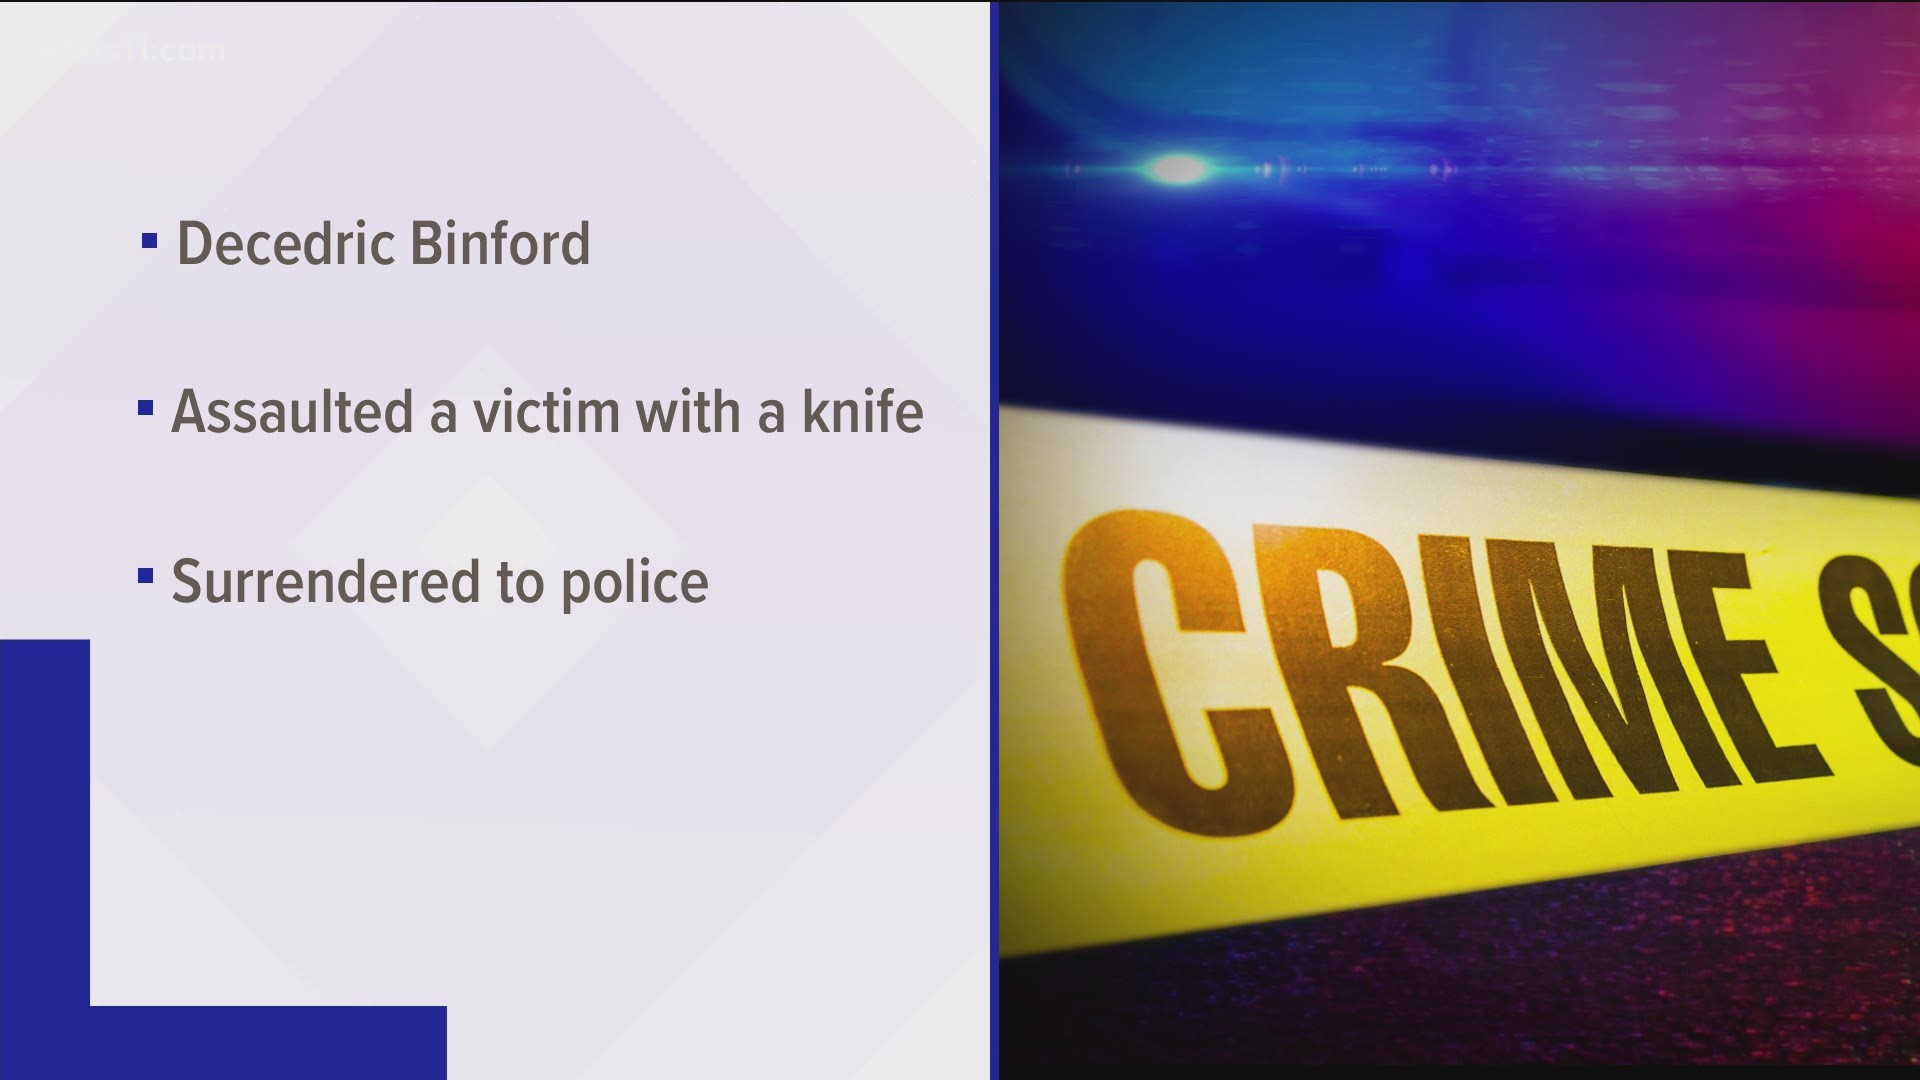 Decedric Binford was arrested after police said he assaulted a woman with a knife that then led to a two-hour standoff.